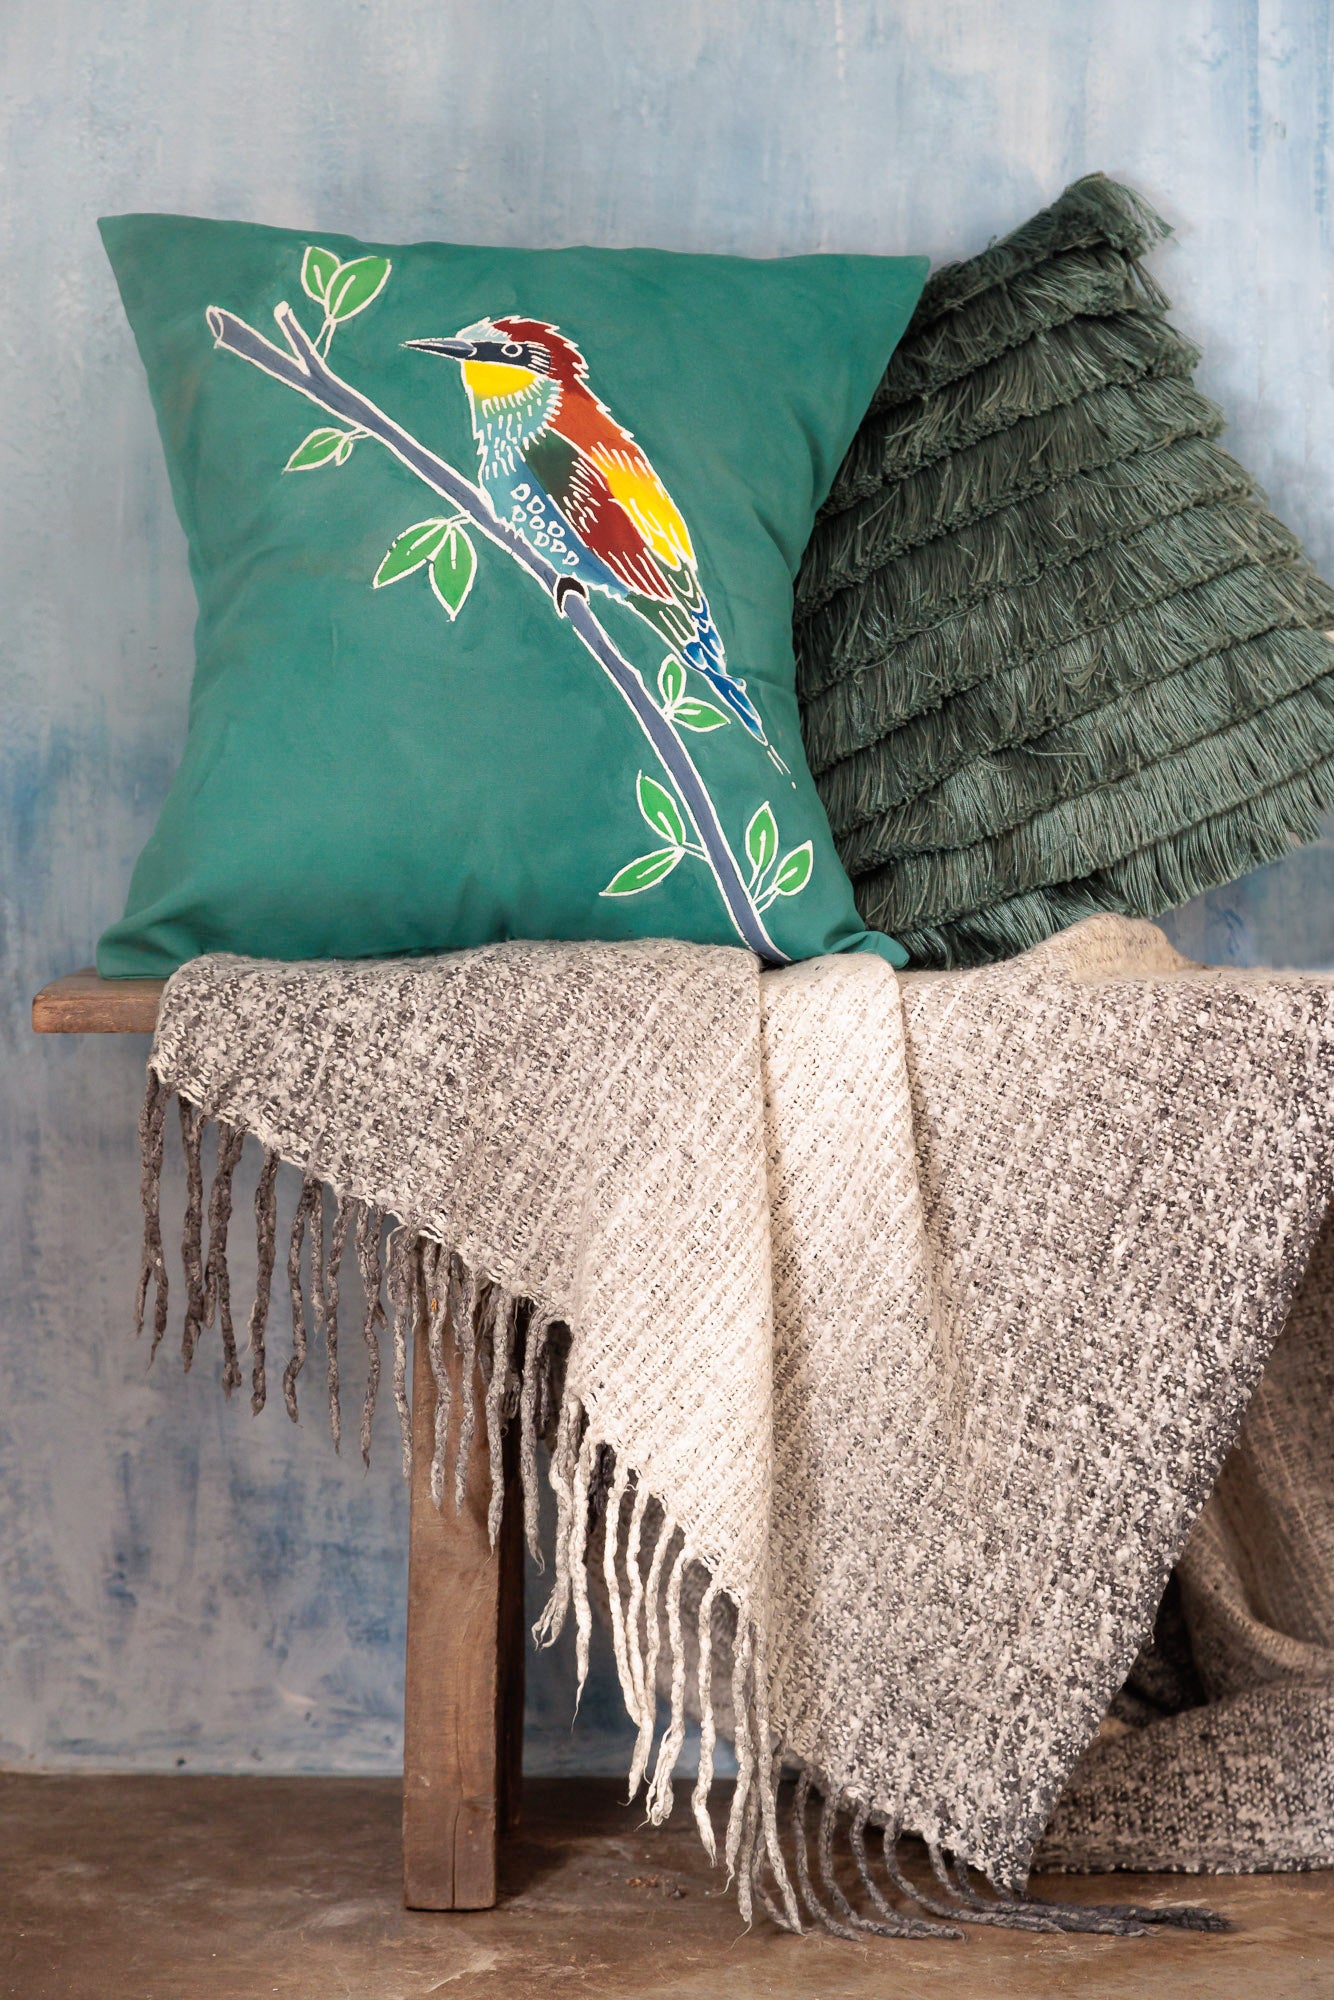 Papiko European Bee-Eater Cushion Cover - Hand Painted by TRIBAL TEXTILES - Handcrafted Home Decor Interiors - African Made